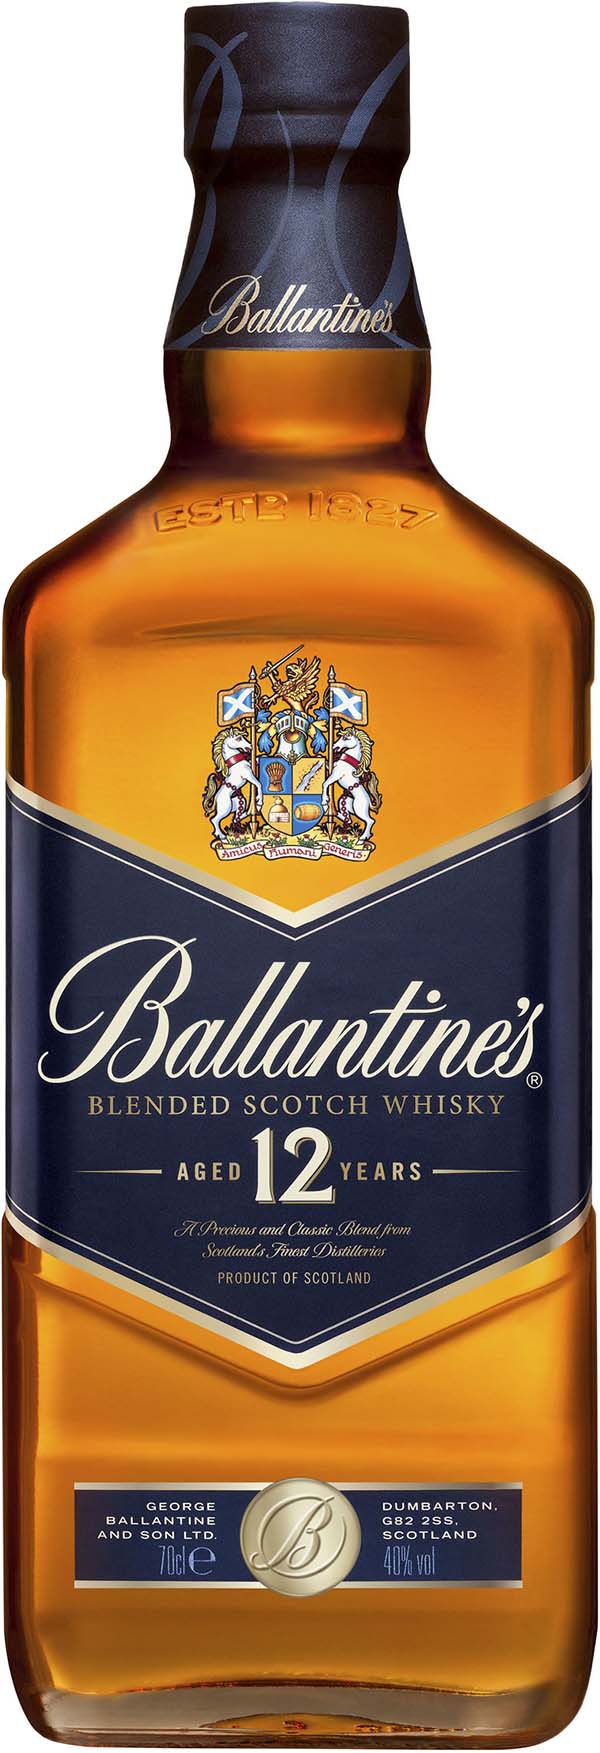 Chamber Cellars » BALLANTINES 12 YEARS OLD SCOTCH WHISKY